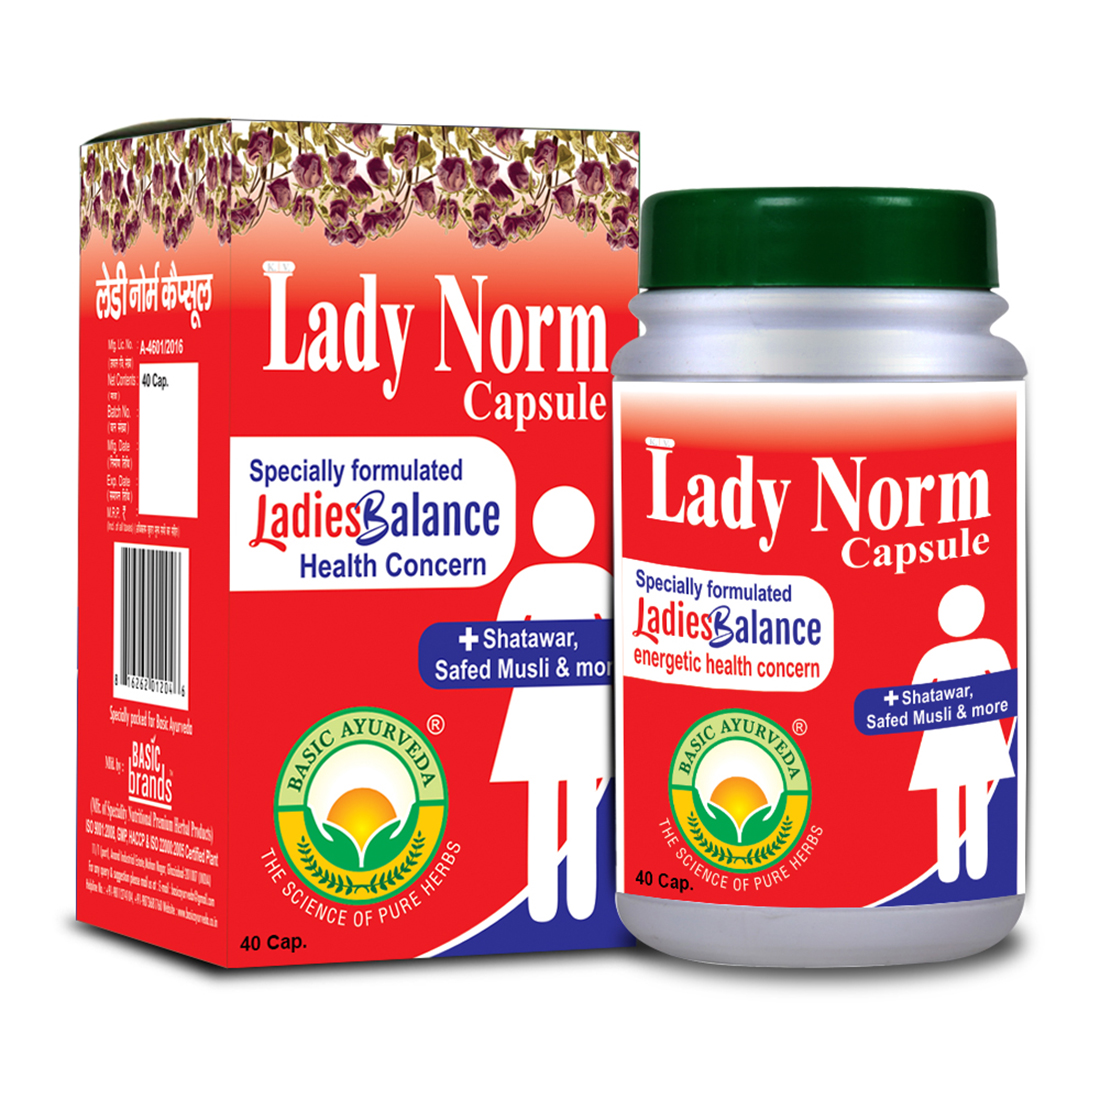 Lady Norm Capsule